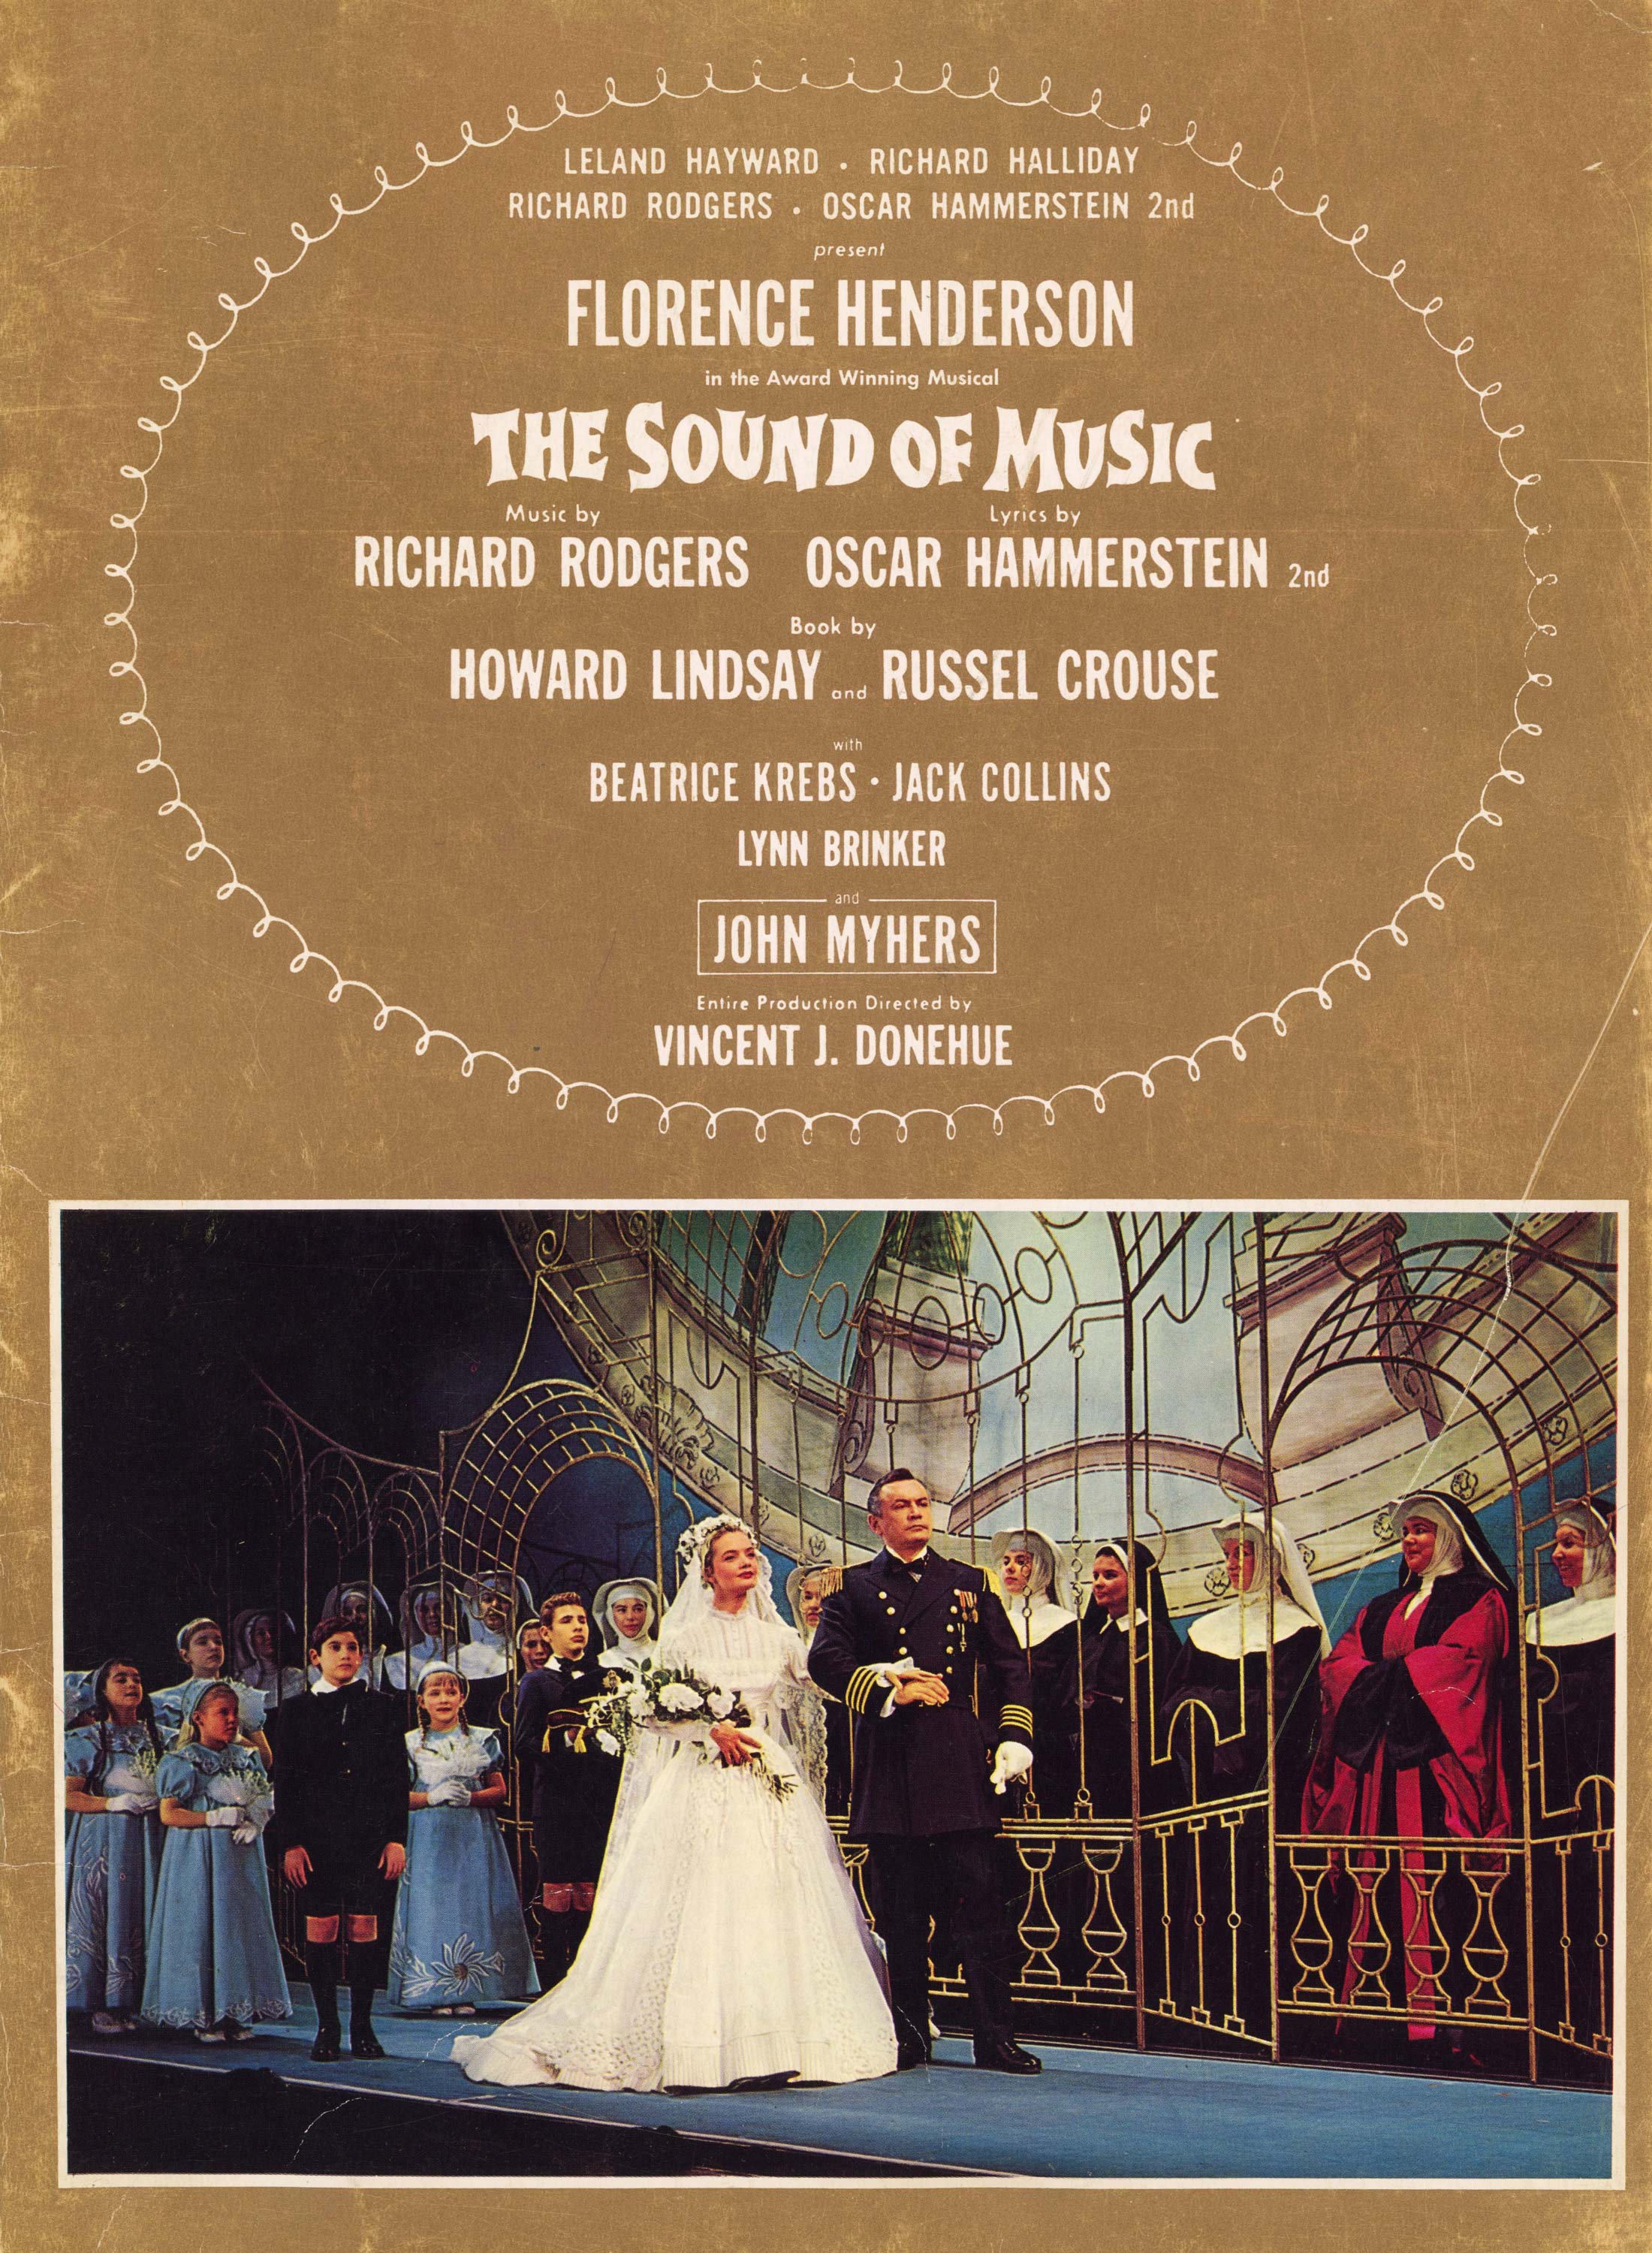 A program cover from the 1961 US National Tour production of The Sound of Music.